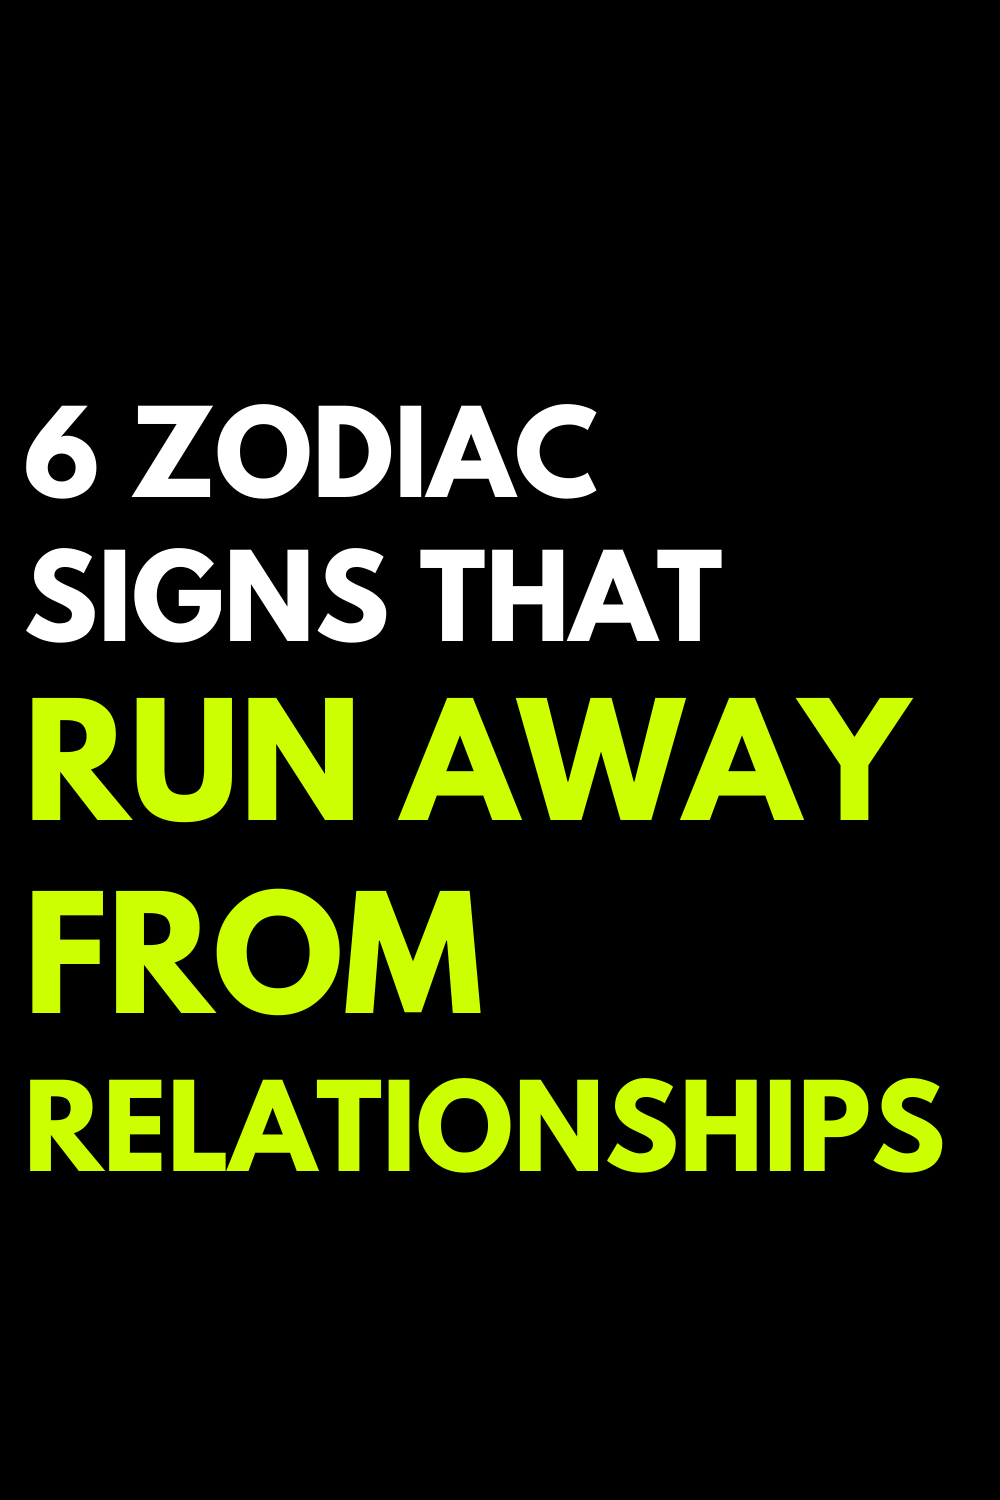 6 zodiac signs that run away from relationships